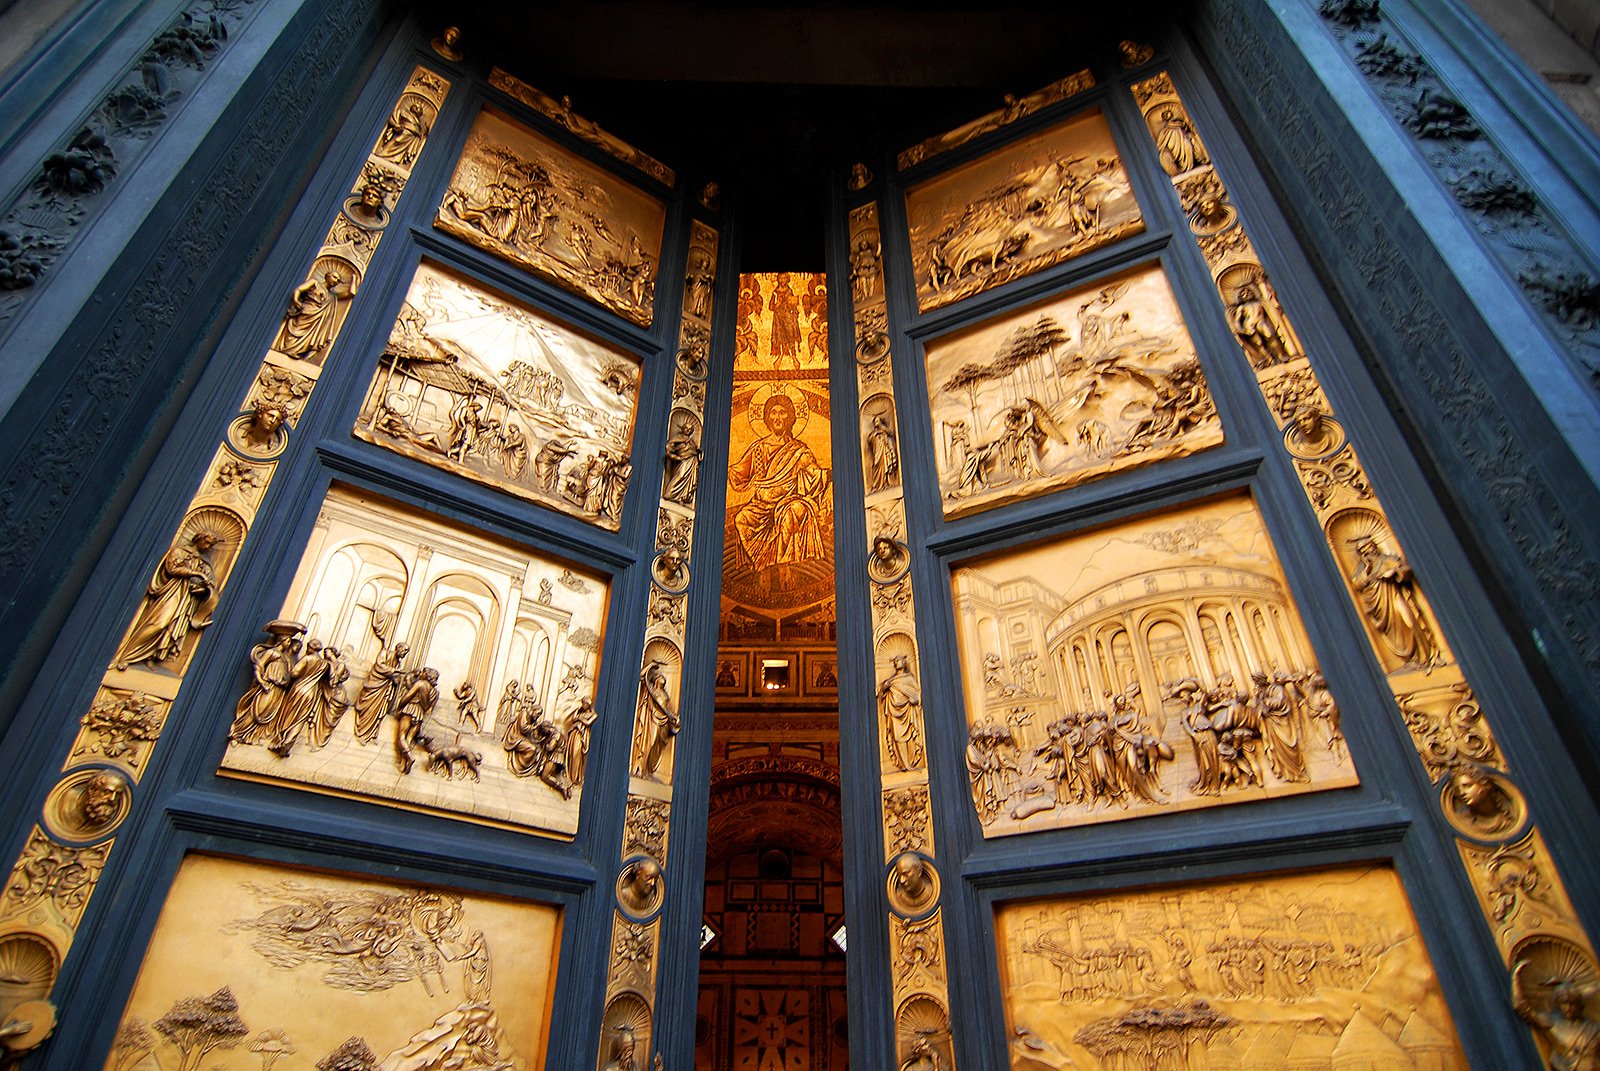 How to see the "Gates of Paradise" in Florence